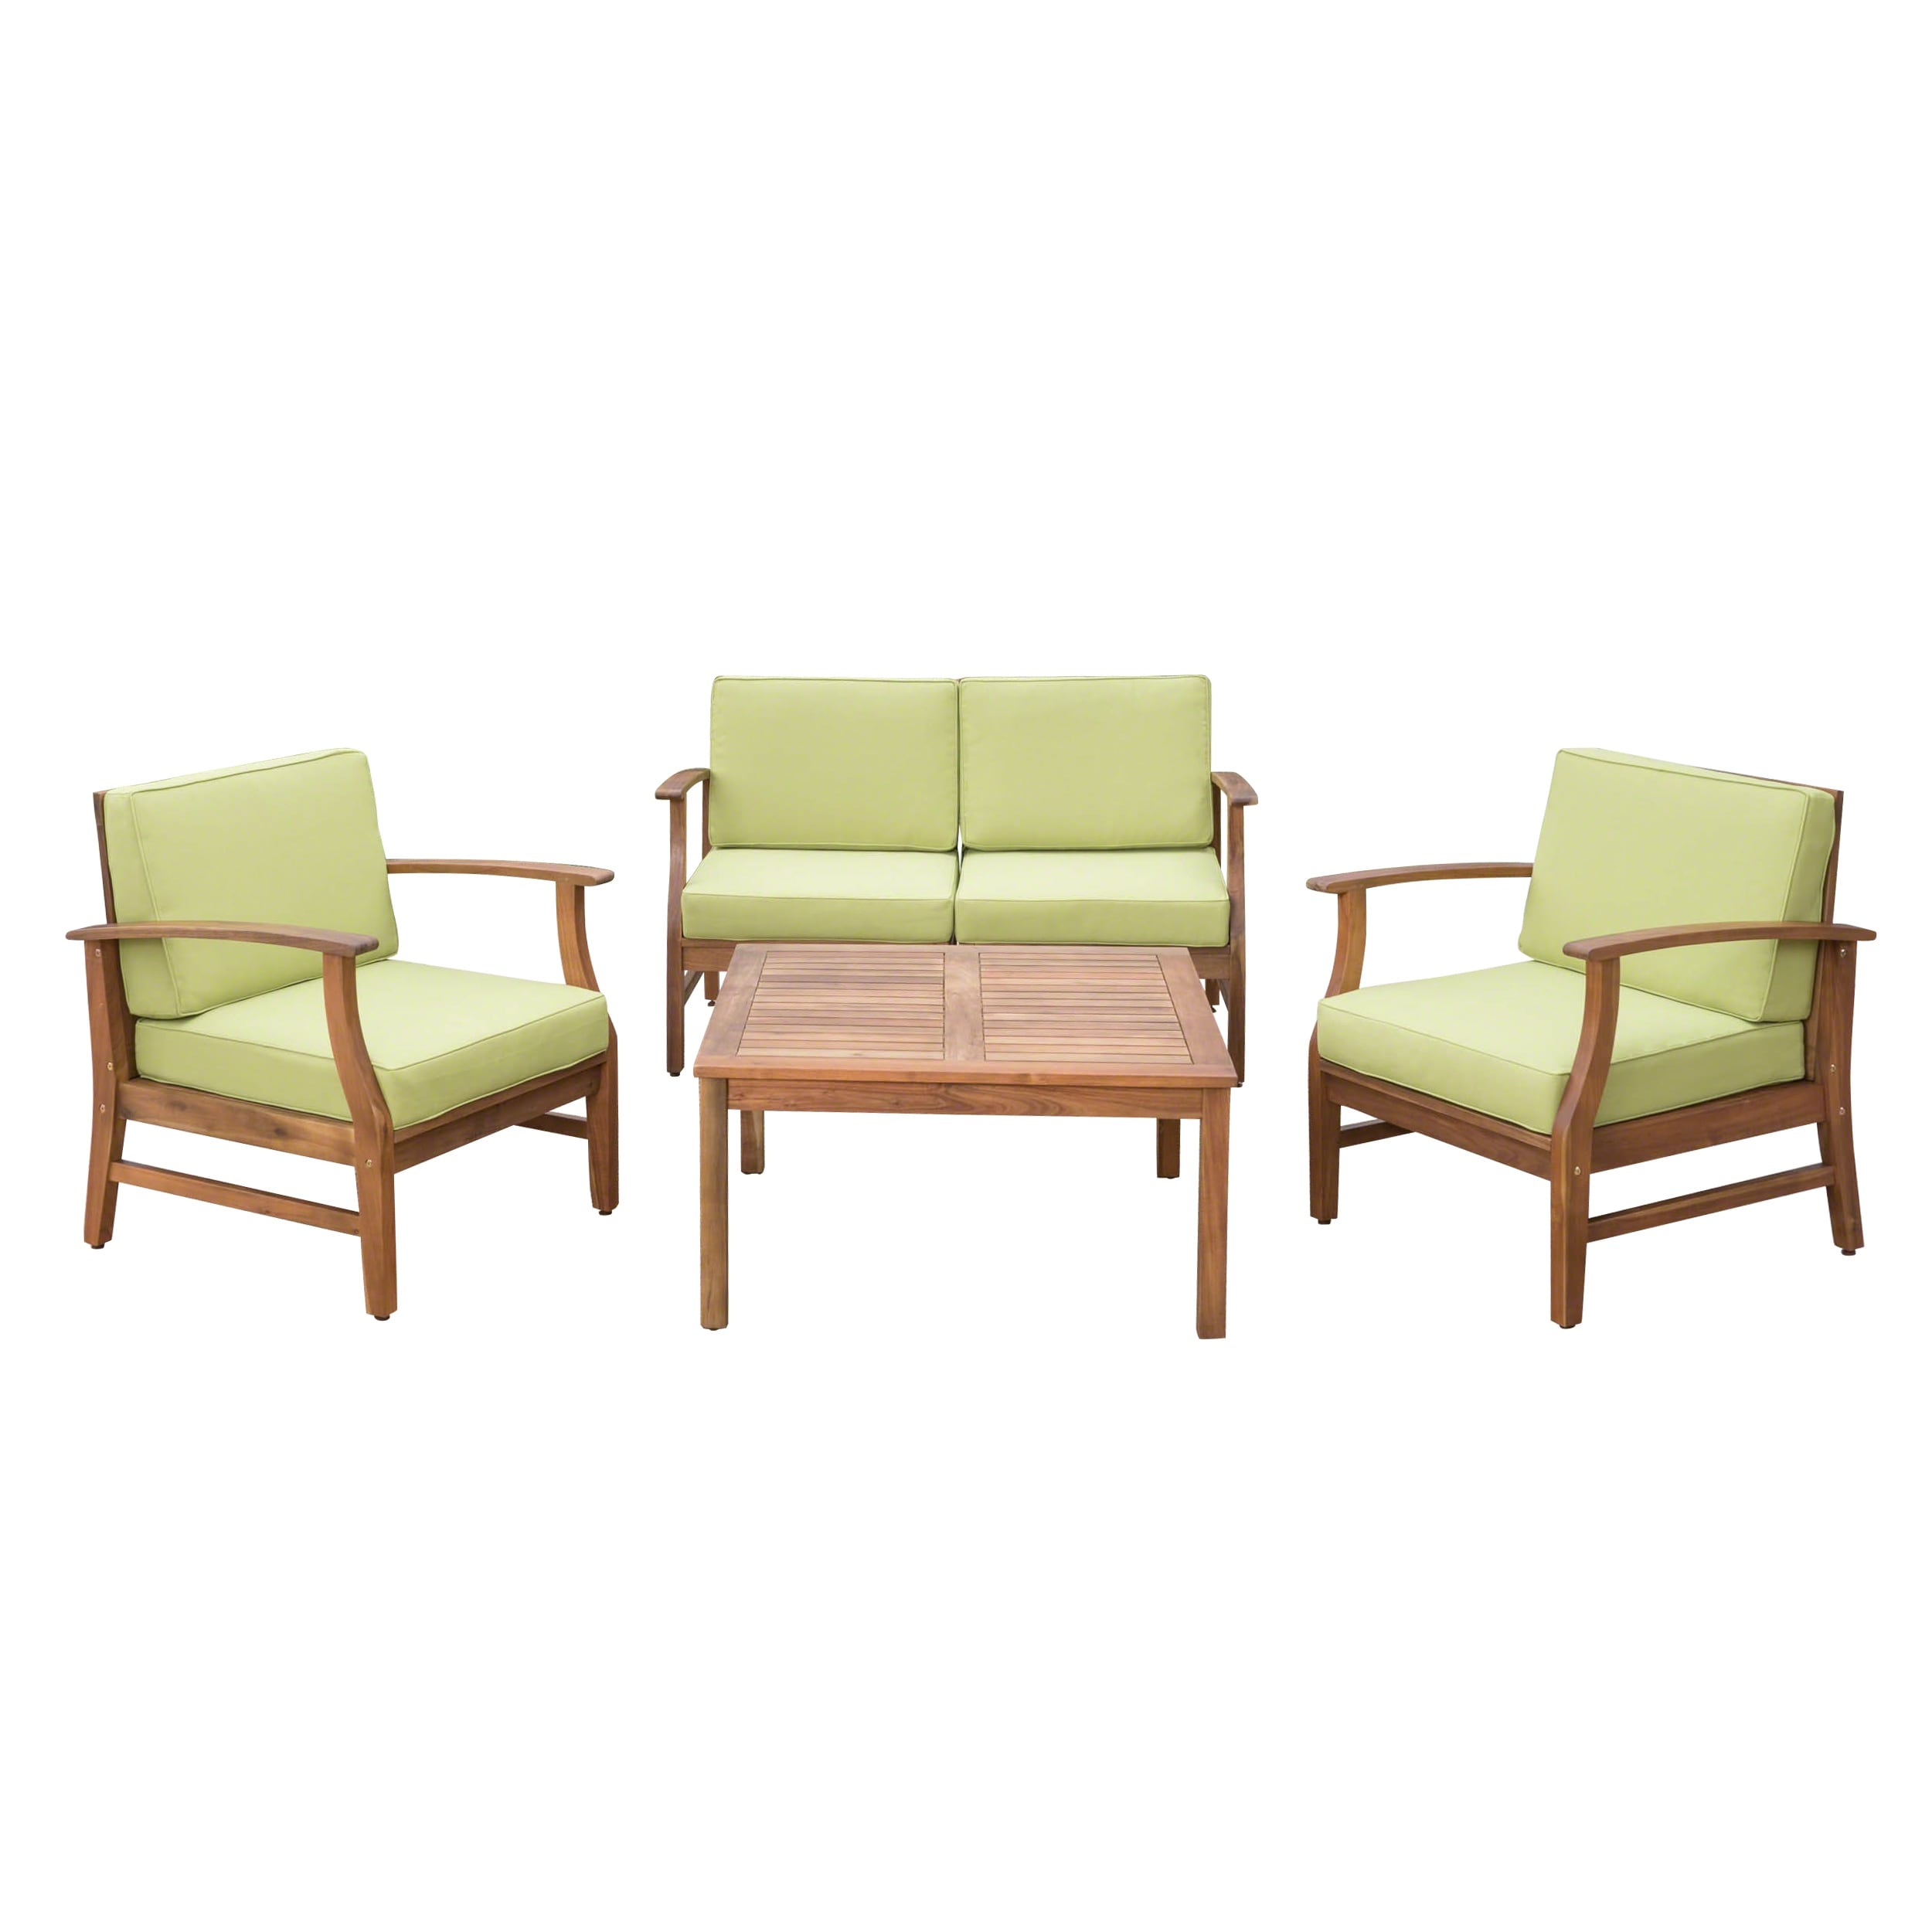 Perla Acacia 5-piece Chat Set With Cushions By Christopher Knight Home